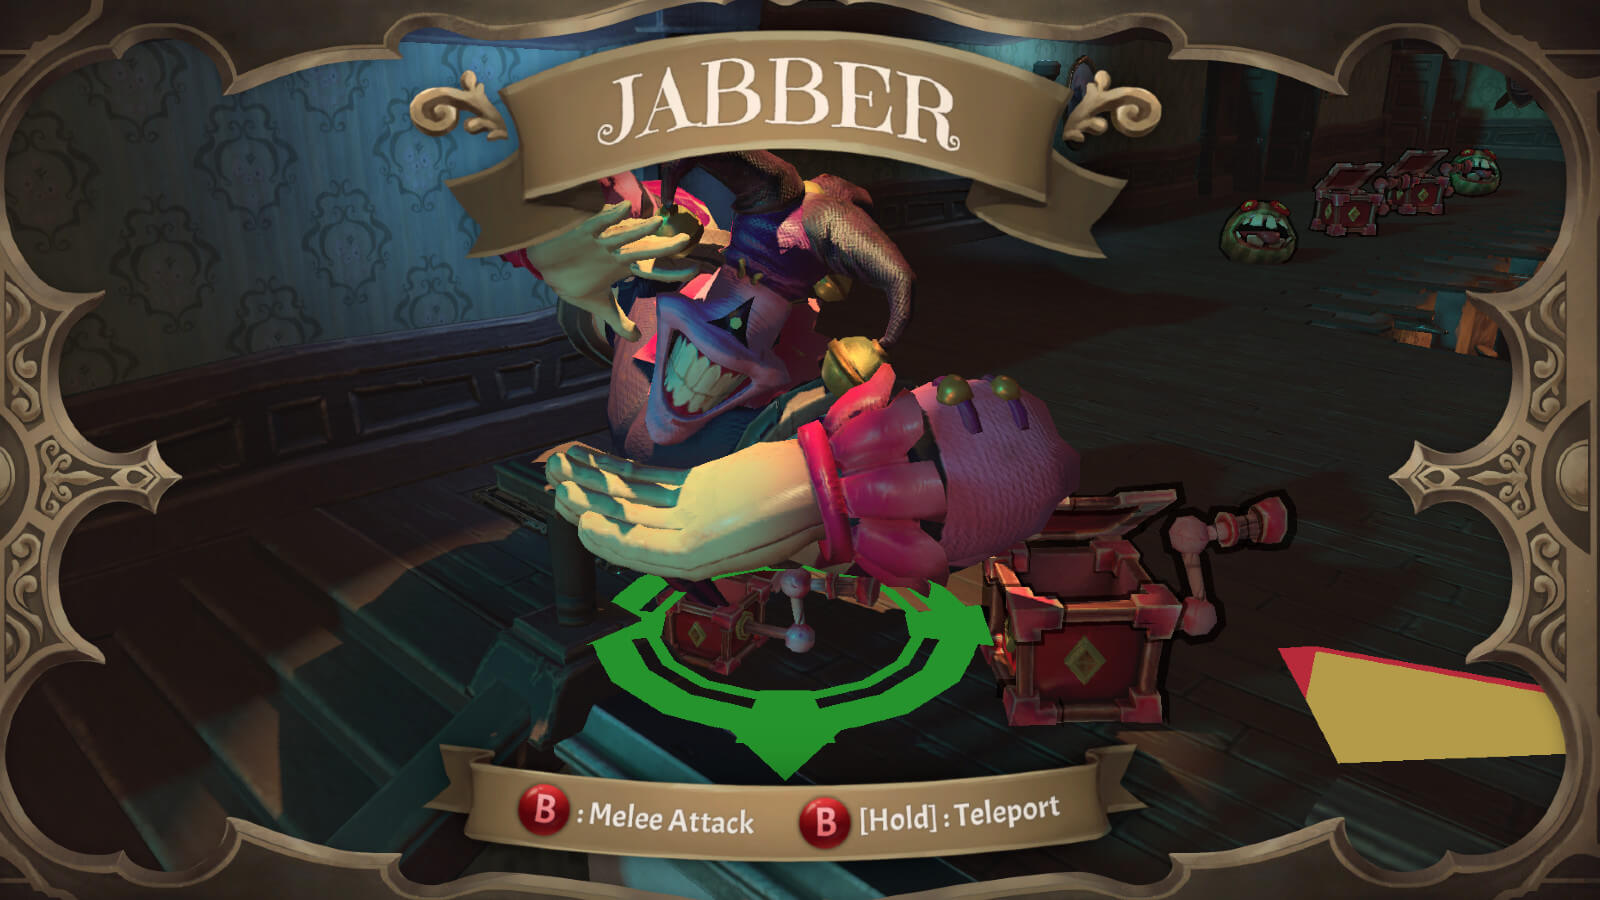 Character screen showing the jester named Jabber coming out of a music box